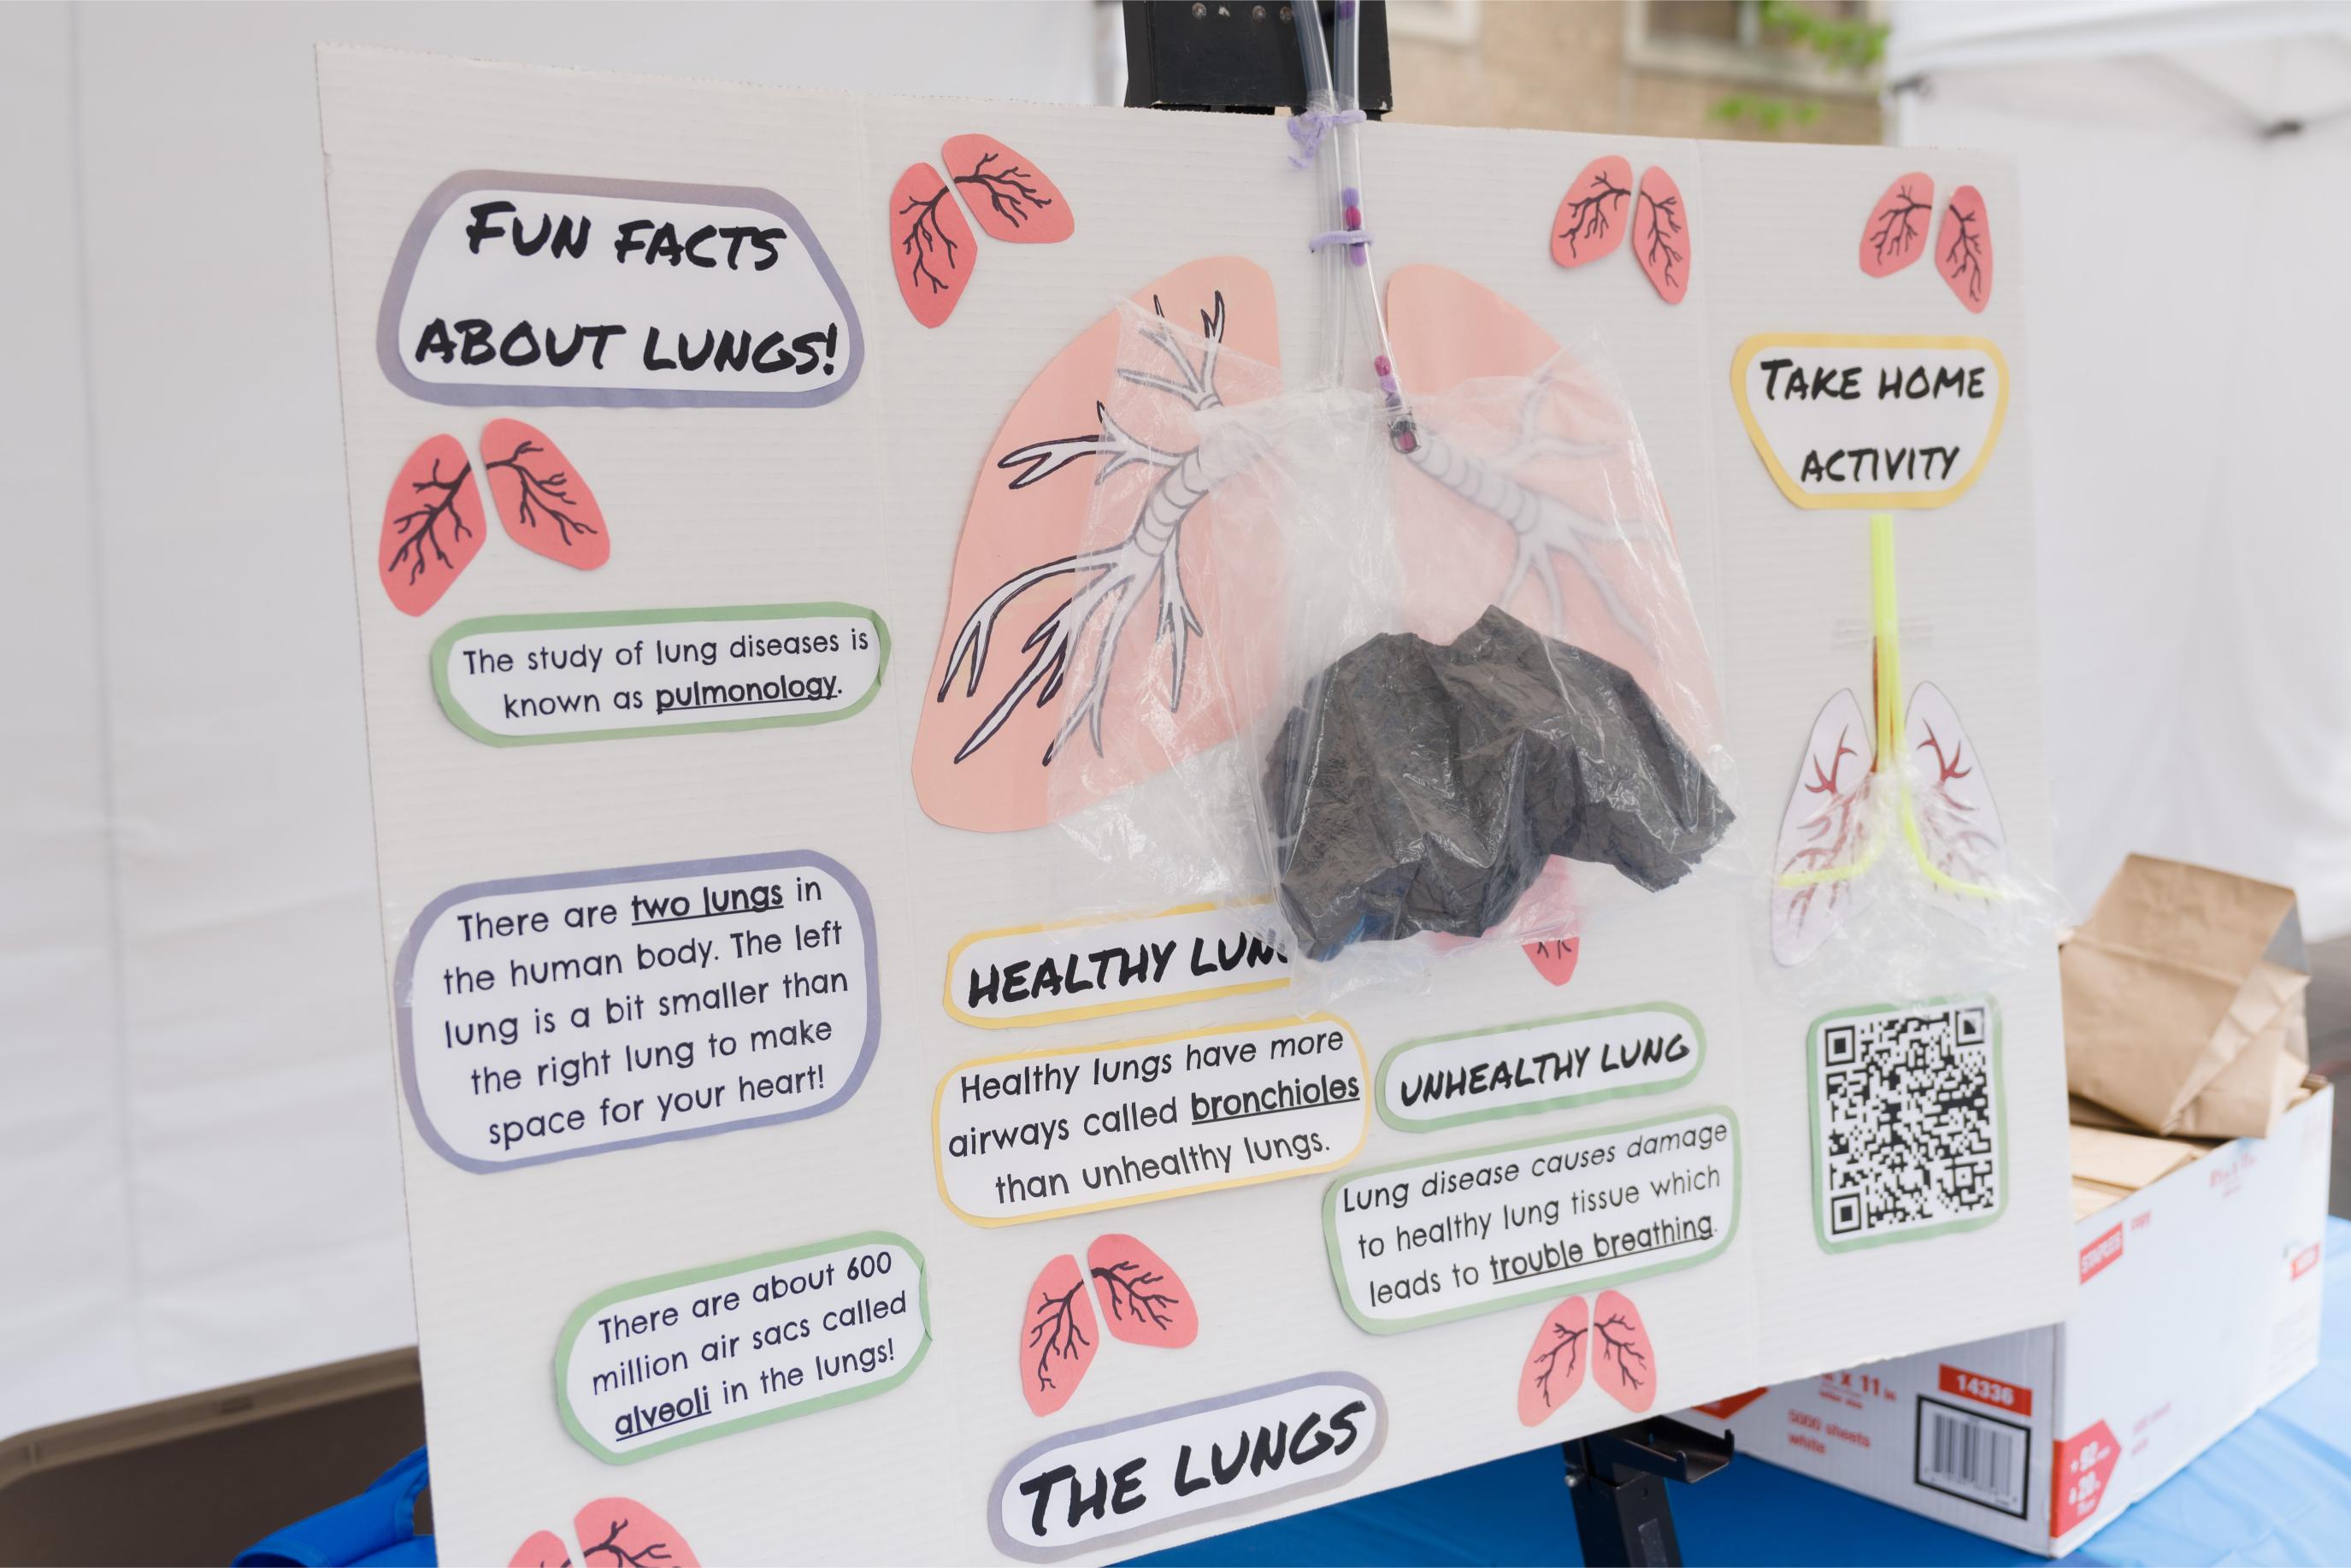 A lung model made with tubes and plastic bags on a presentation board is used by volunteers at the Lung Function Booth to demonstrate how the lung functions.